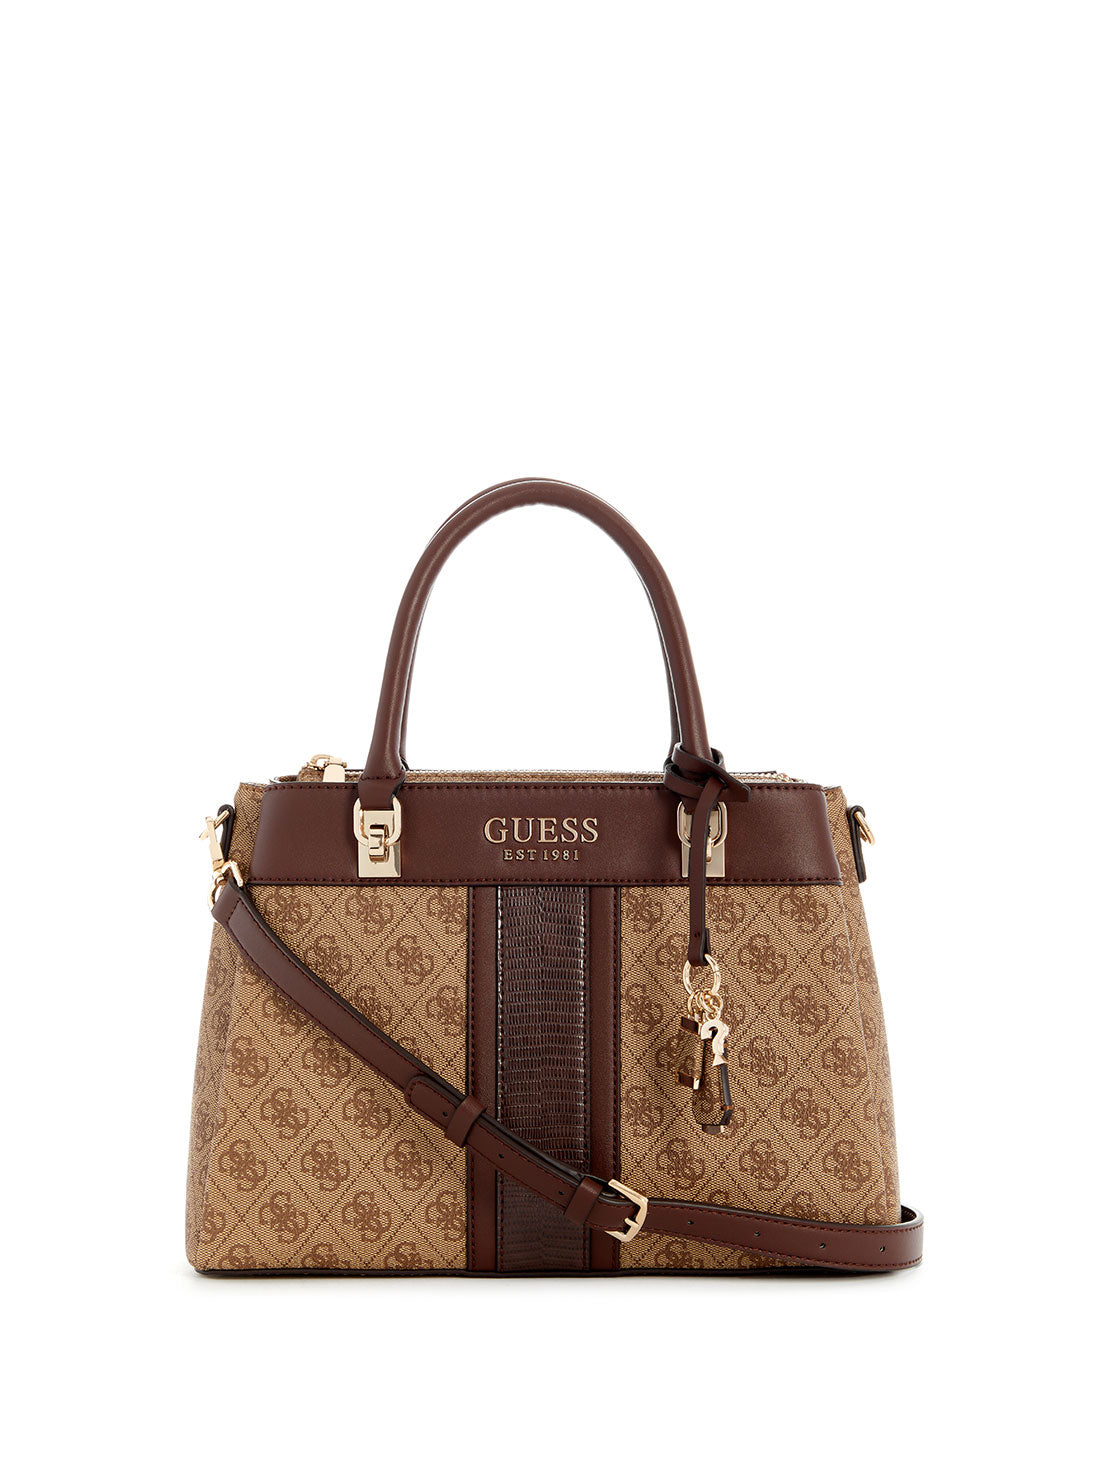 GUESS Brown Logo Cristiana Satchel Bag front view